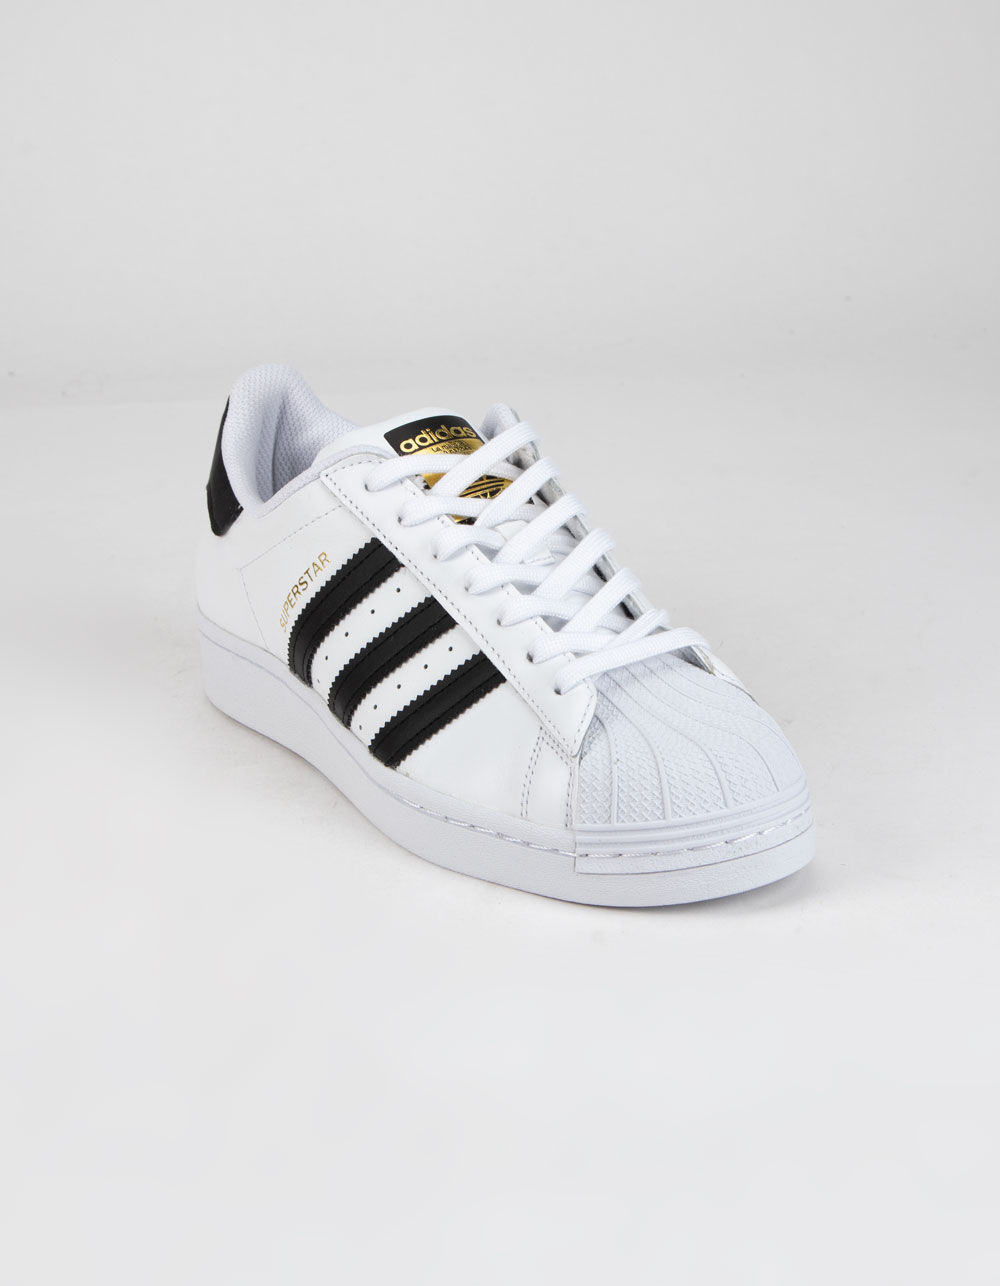 ADIDAS Superstar Womens Shoes - WHITE/BLACK | Tillys